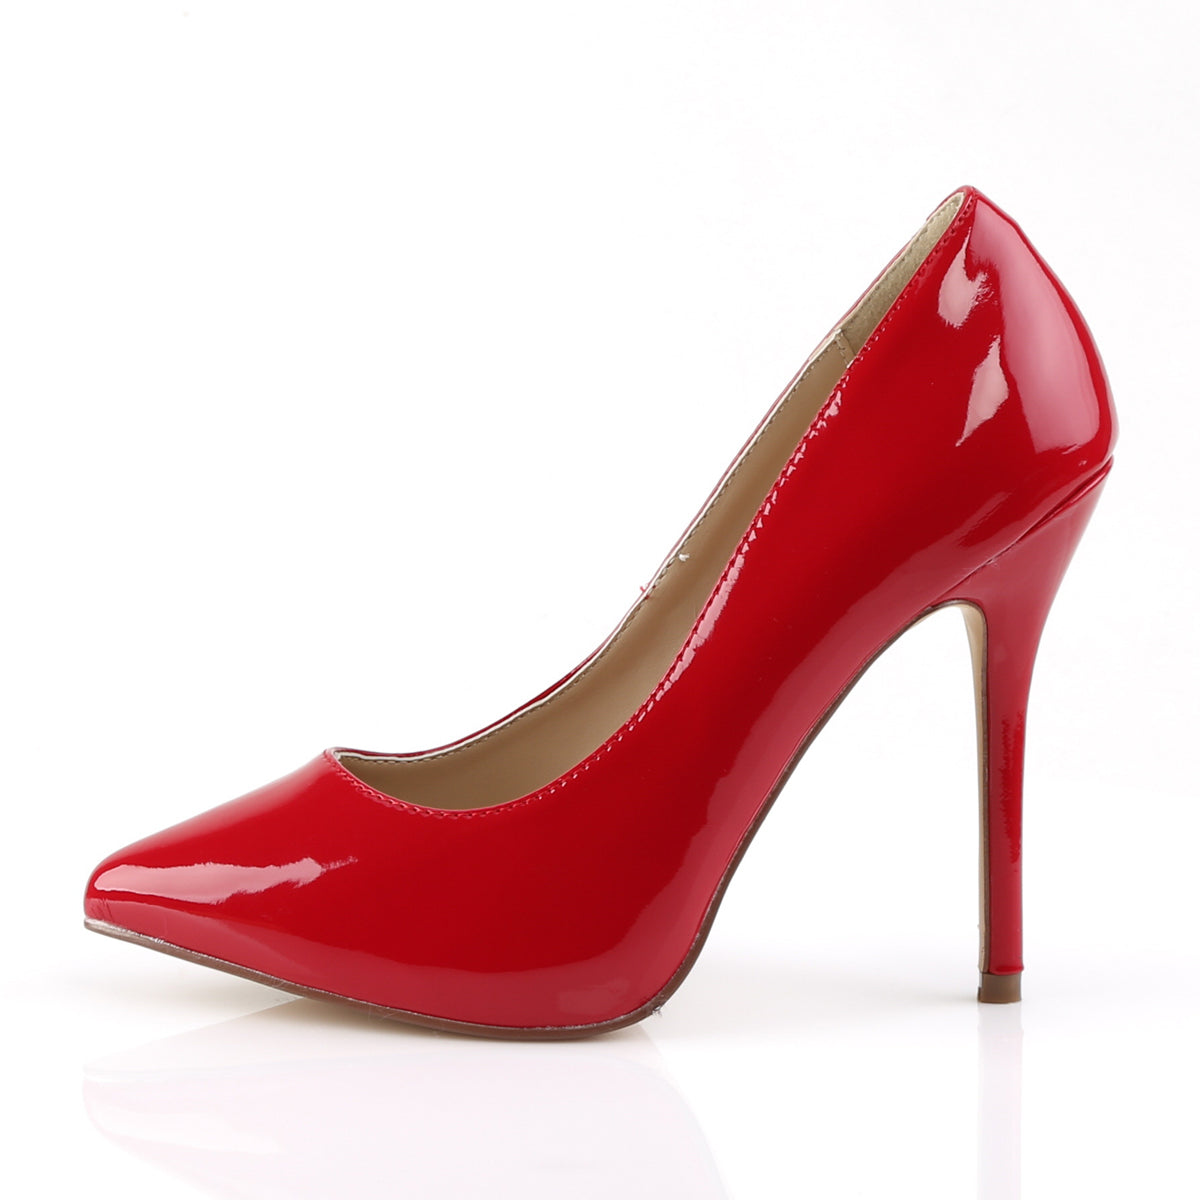 AMUSE-20 Pleaser Sexy 5 Inch Heel Red Fetish Footwear-Pleaser- Sexy Shoes Pole Dance Heels